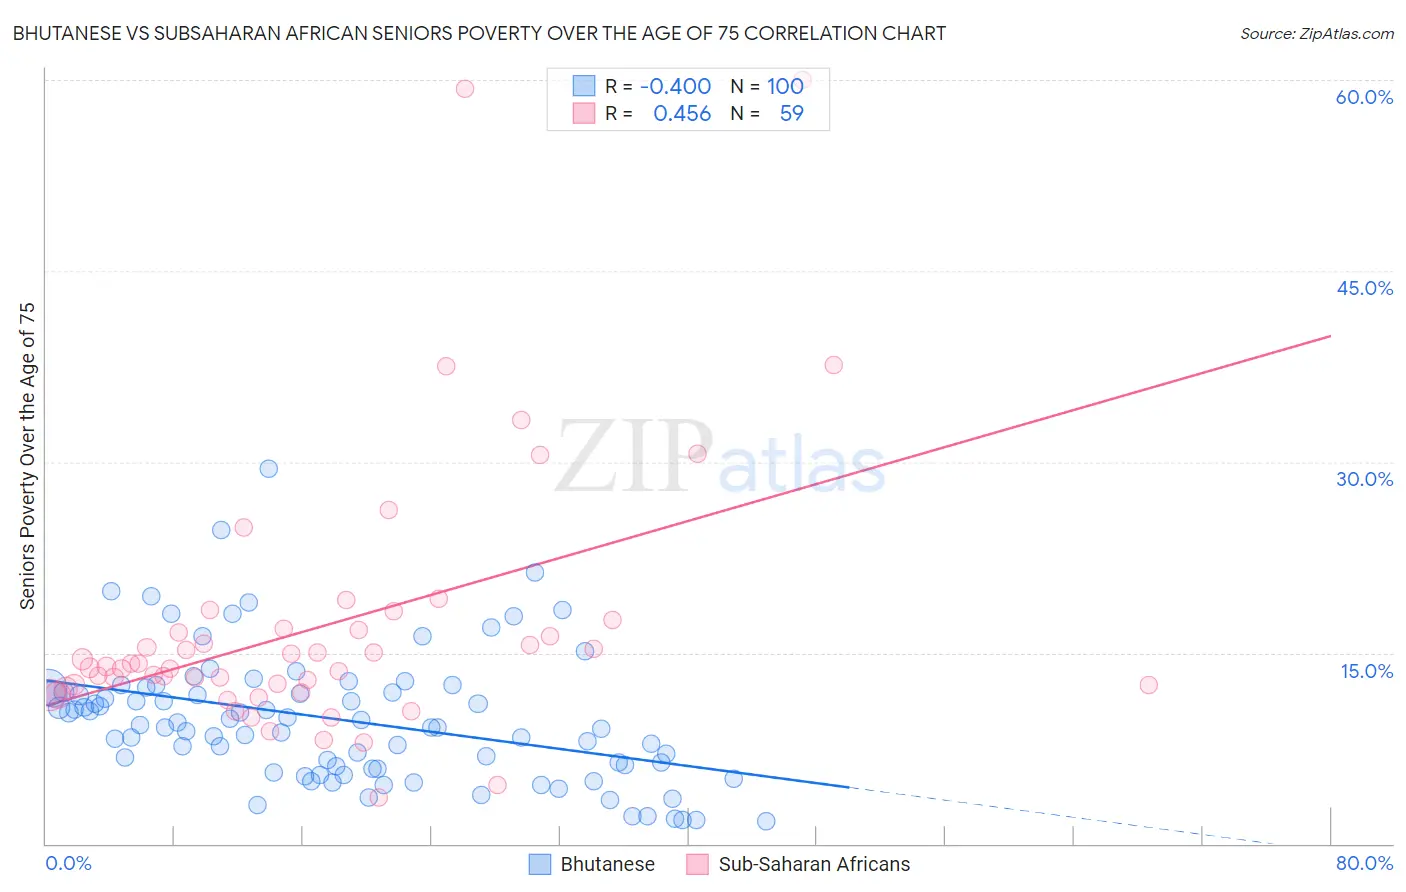 Bhutanese vs Subsaharan African Seniors Poverty Over the Age of 75